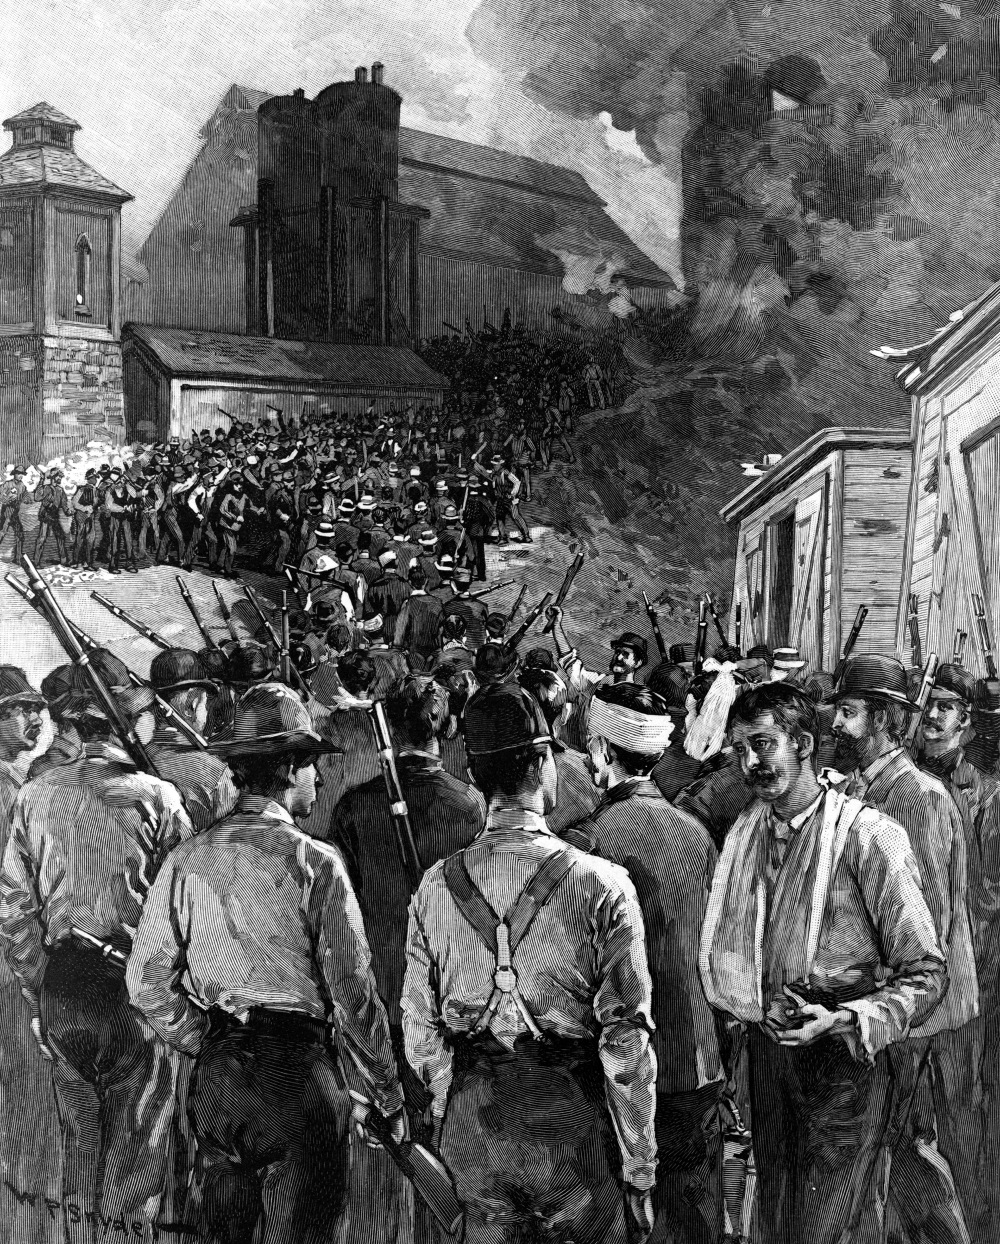 An 1892 cover of Harper’s Weekly depicting the Homestead Riot, showed Pinkerton men who had surrendered to the steel mill workers navigating a gauntlet of violent strikers. W.P. Synder (artist) after a photograph by Dabbs, “The Homestead Riot,” 1892.  Library of Congress, LC-USZ62-126046.